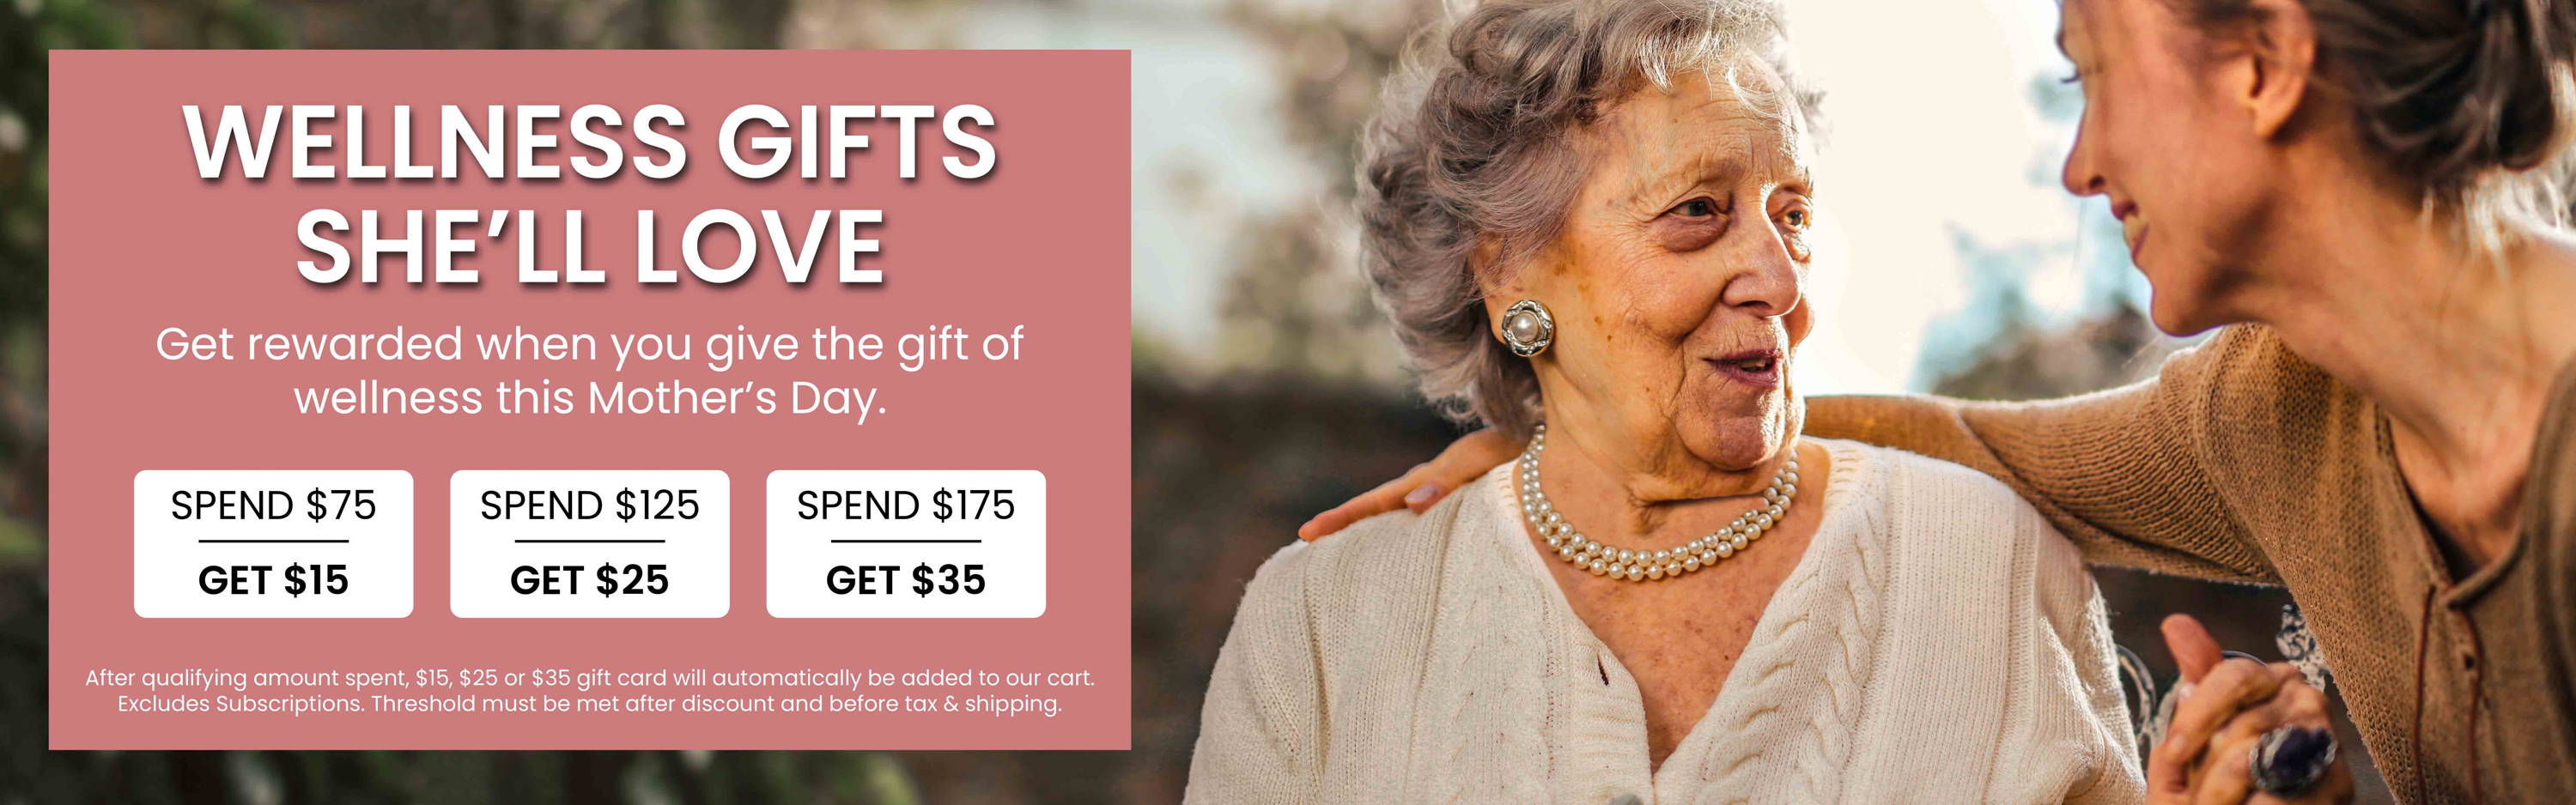 Wellness Gifts She'll Love. Get rewarded whe you give the gift of wellness this Mother's Day. Shop Now.